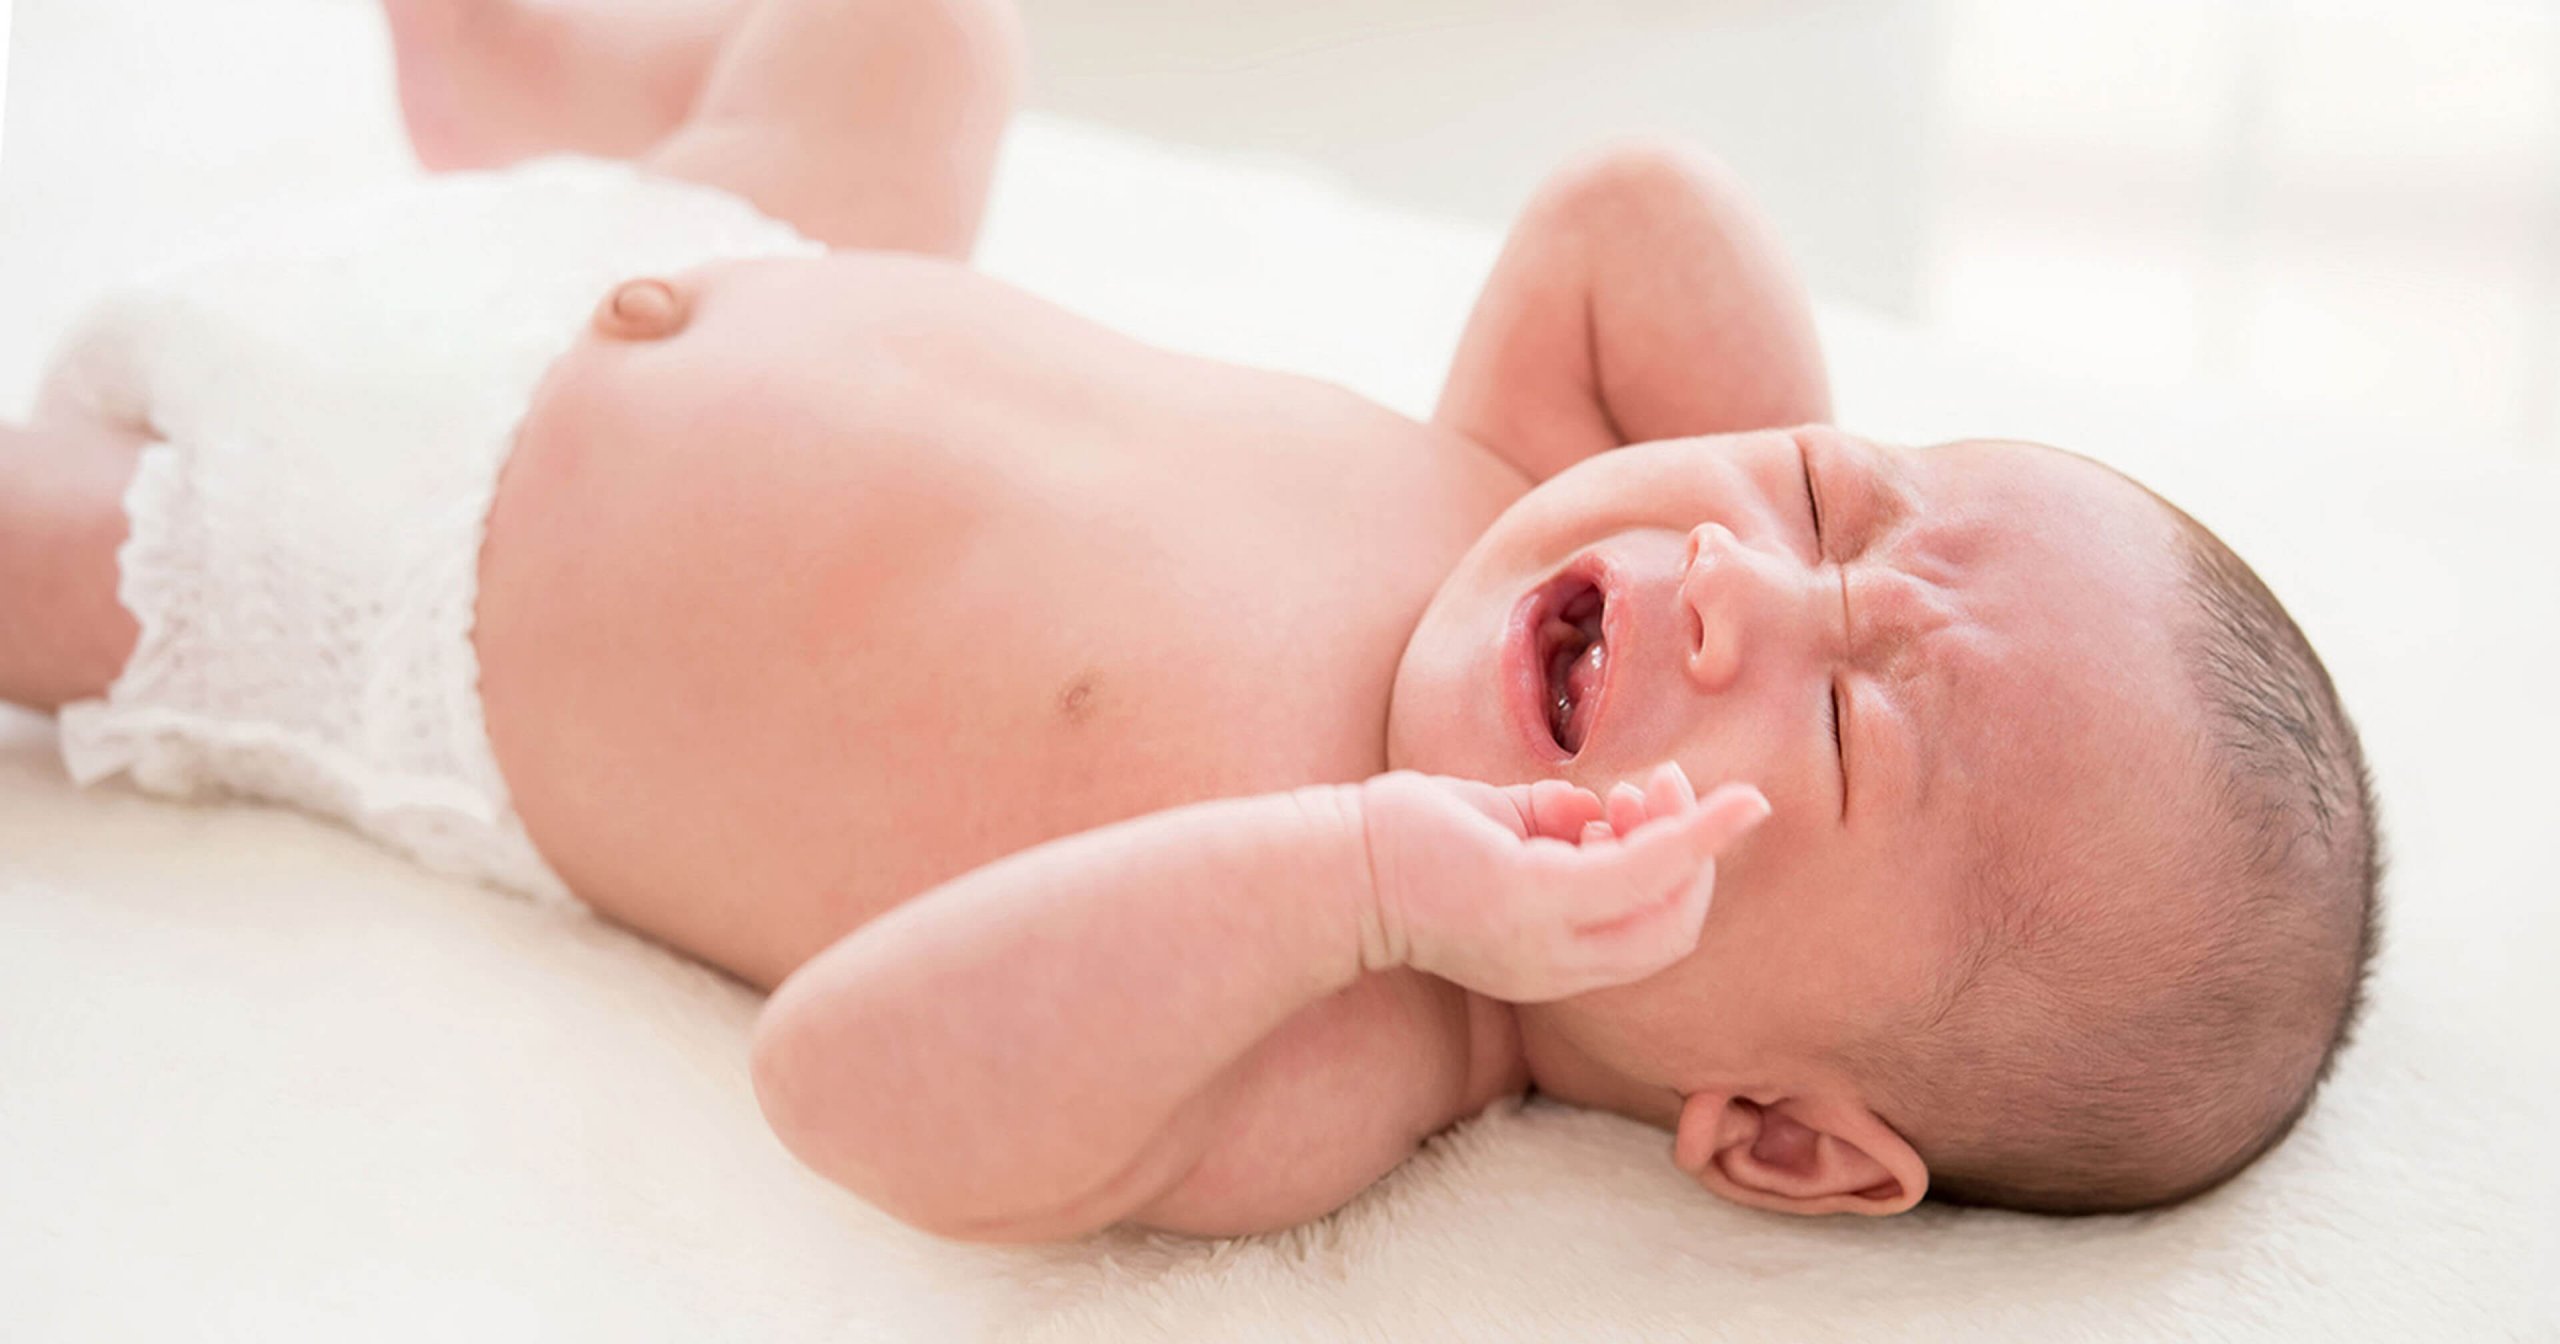 Consider the effective 10 ways for newborn constipation relief.